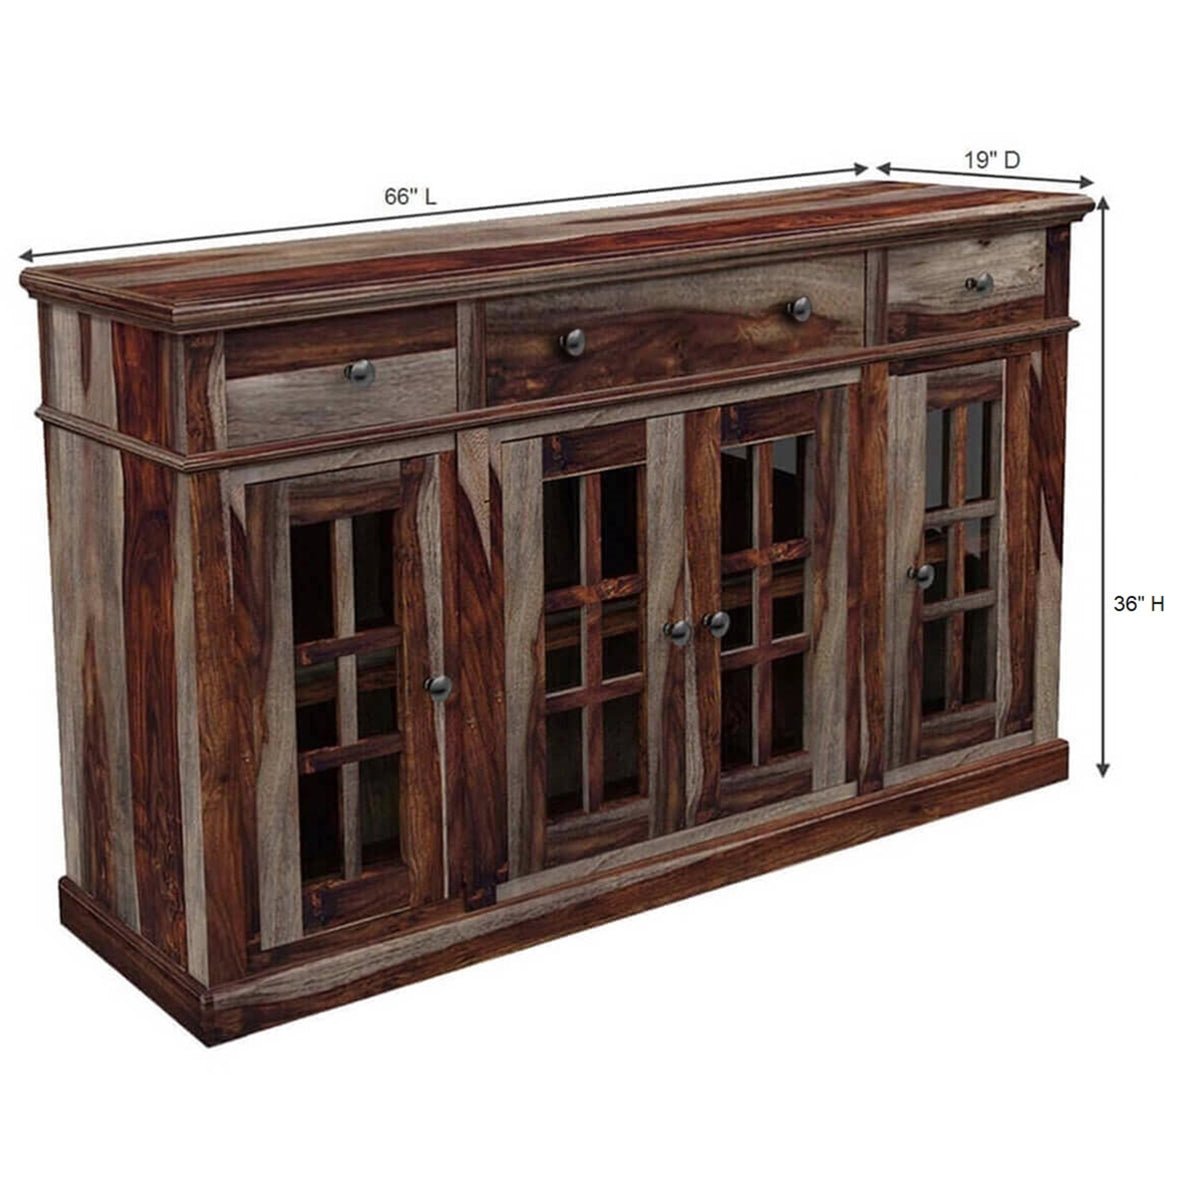 Dallas Ranch Rustic Solid Wood Contemporary Large Buffet Cabinet